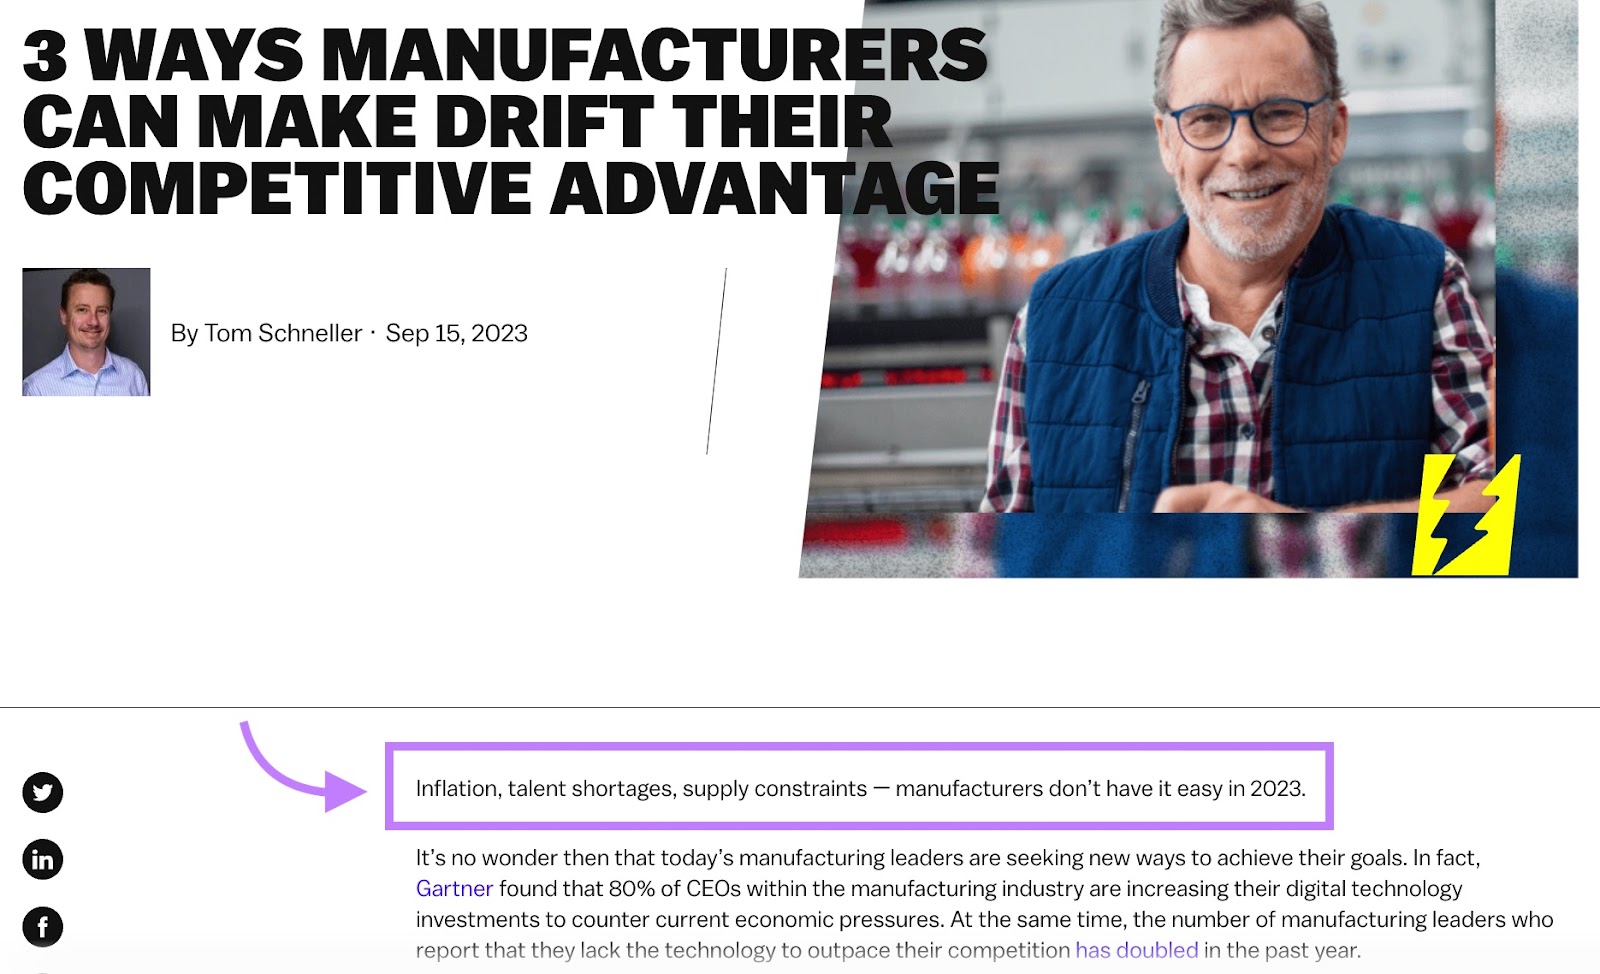 Drift’s article on "3 ways manufacturers can make drift their competitive advantage"